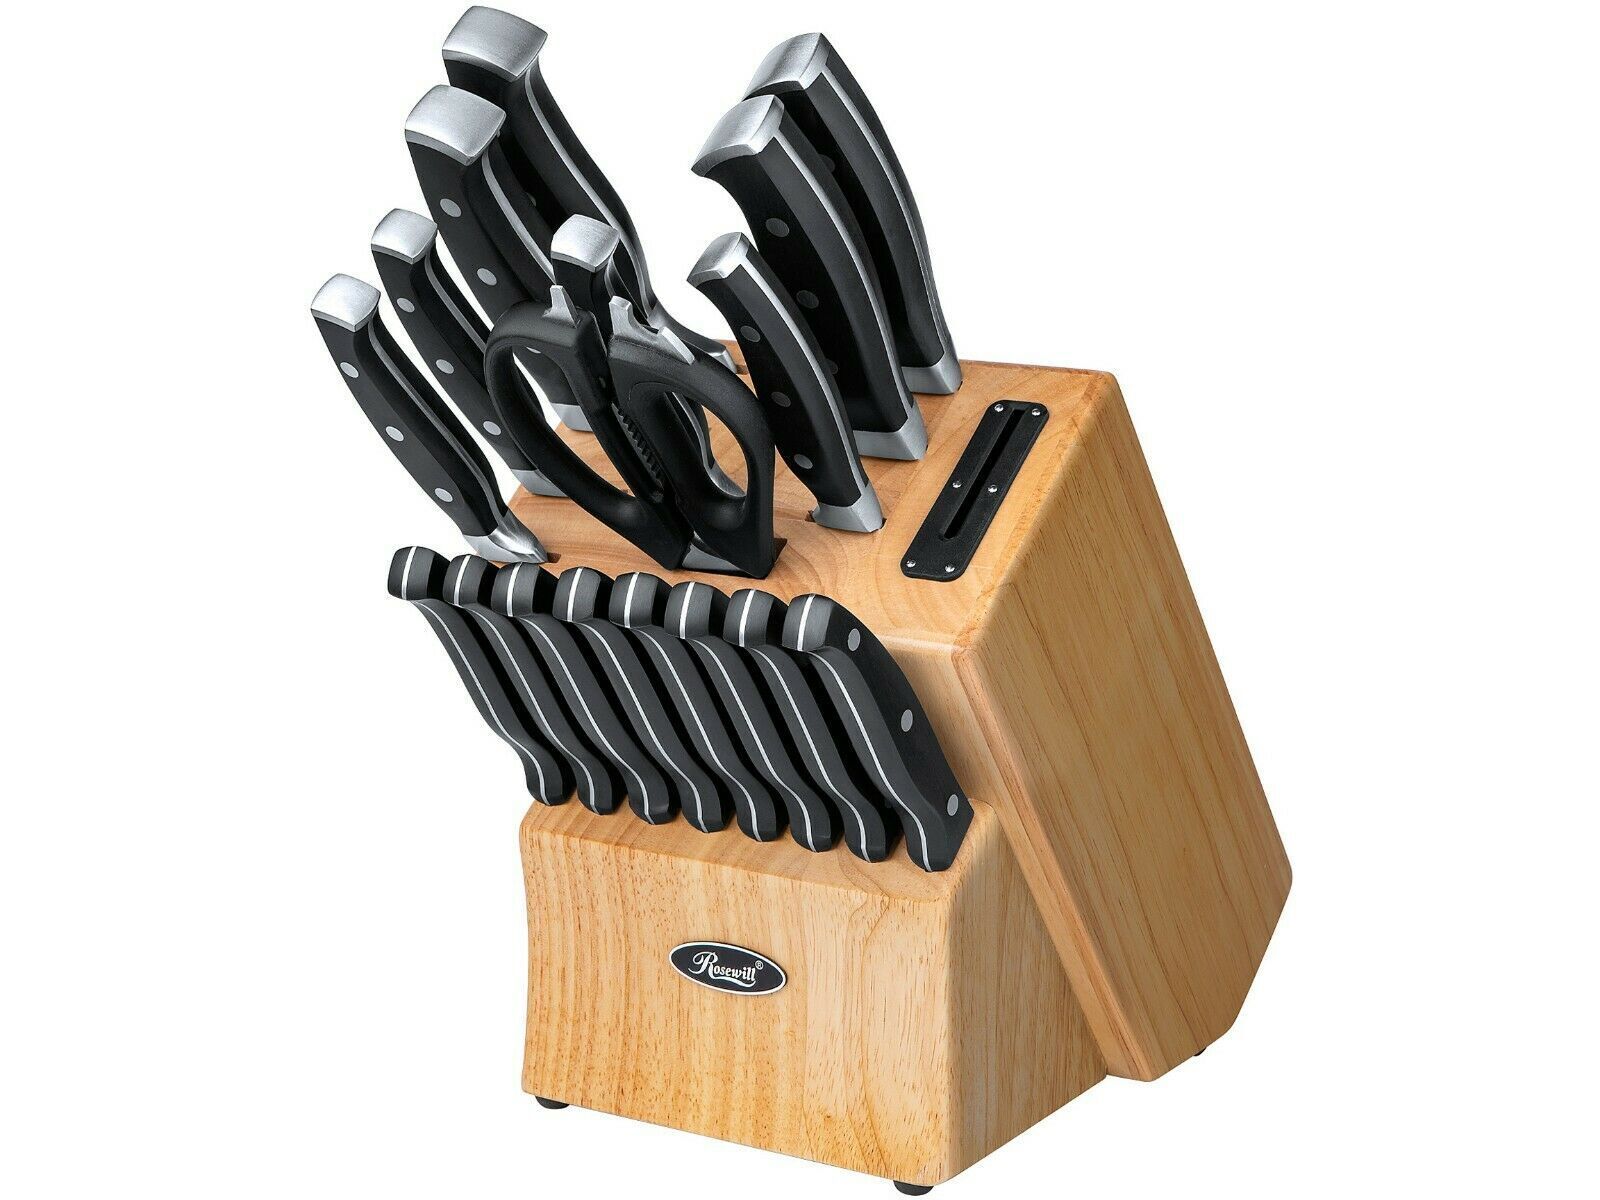 Rosewill 18 Piece Stainless Steel Cutlery Knife Set with Kitchen Shears